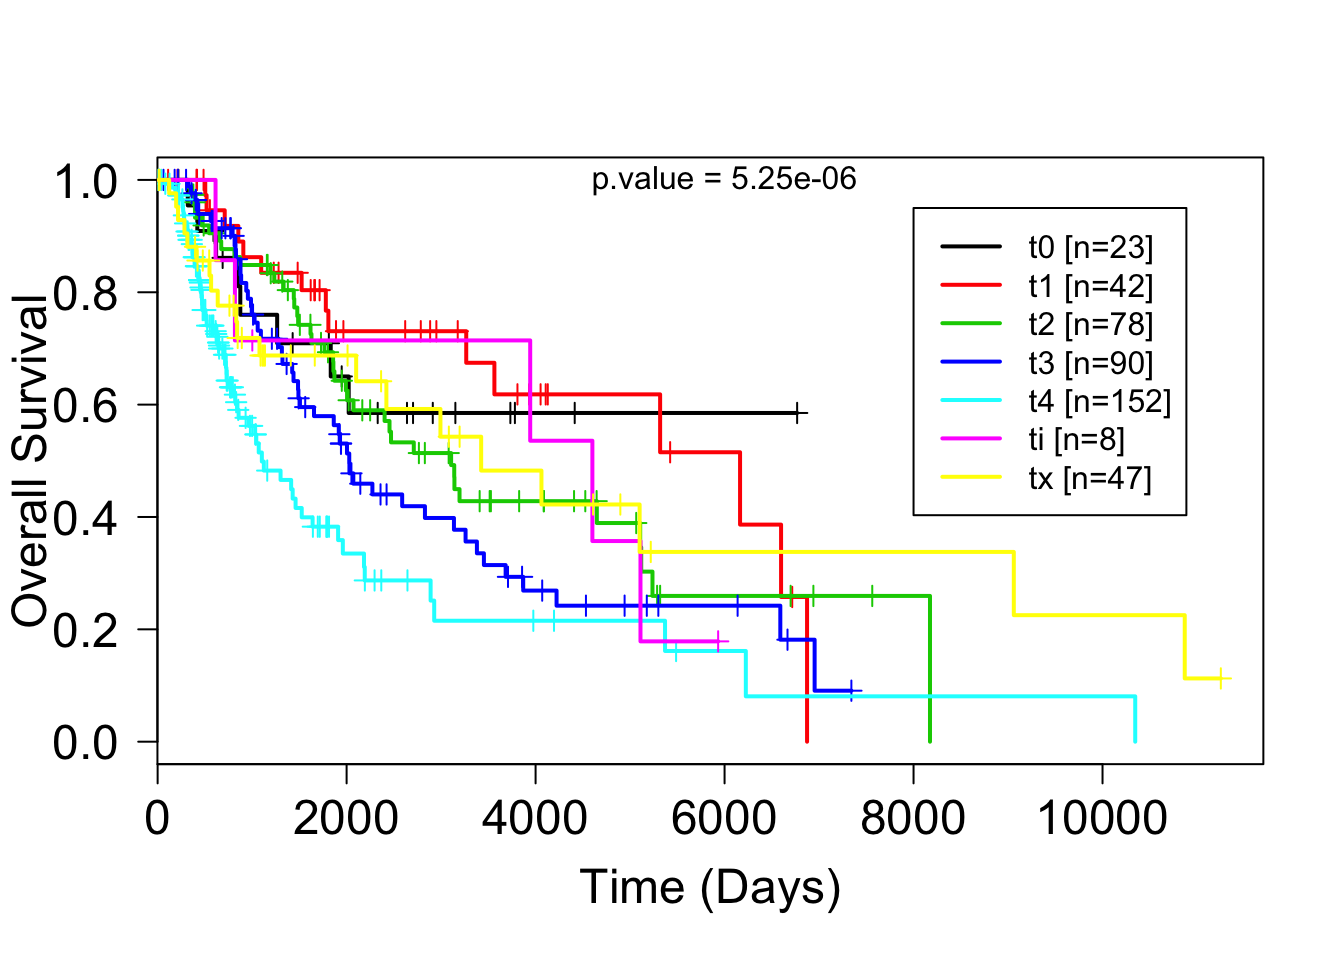 \label{fig:figure2}figure2:Kaplan Meier survival plot of melanoma patients in the TCGA databse according to T stage. As expected, survival becomes poorer from t1 to t4. However it is strange that ti (tis, melanoma insitu) has a sudden drop in survival.